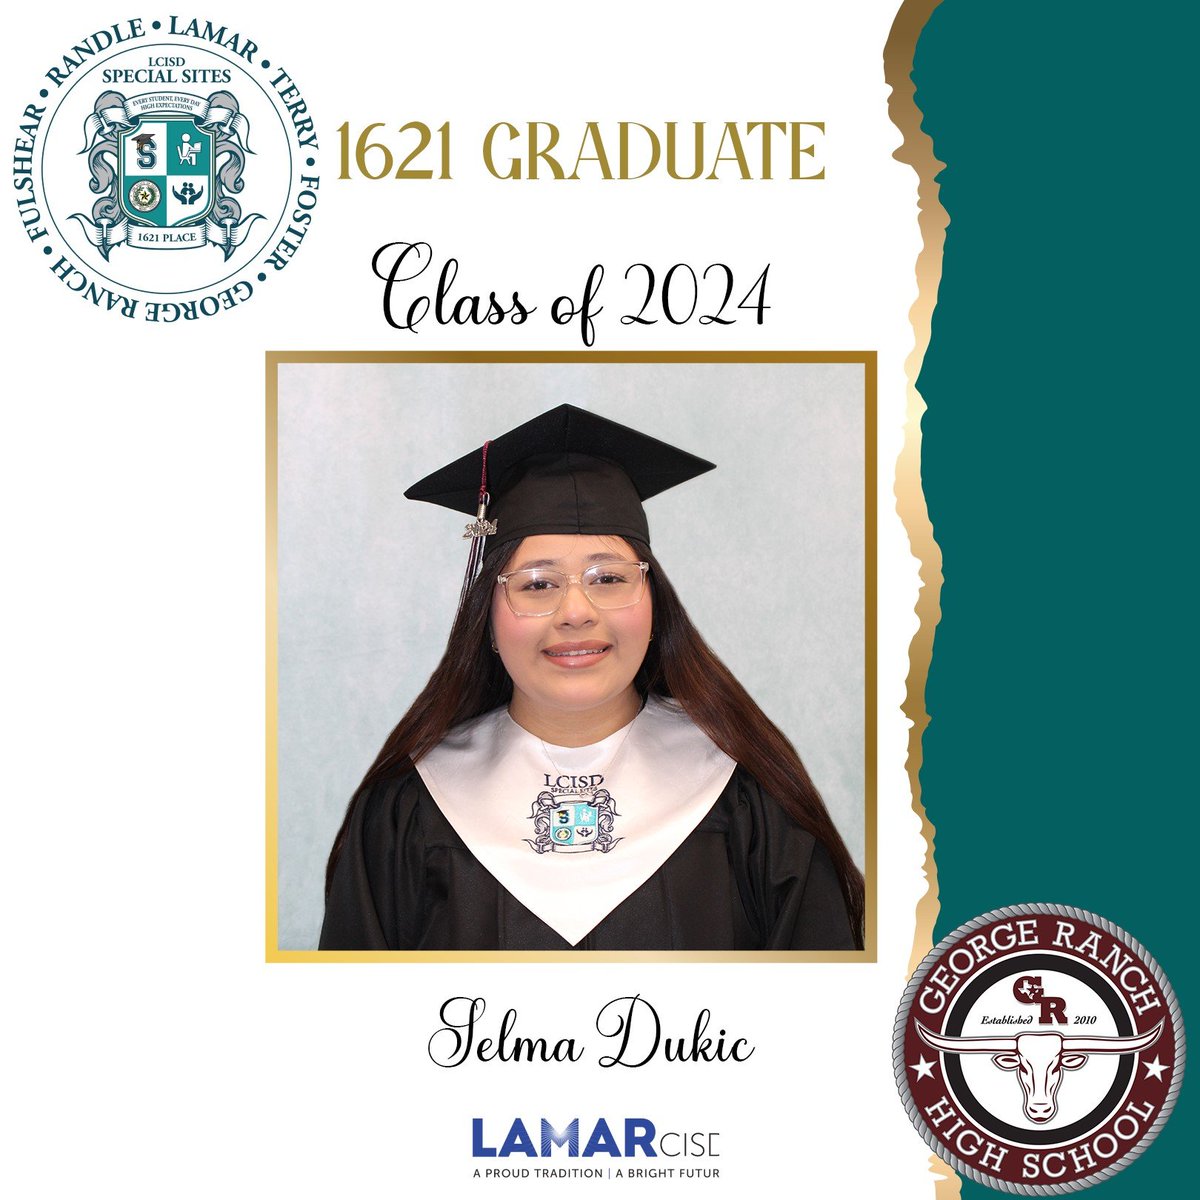 🎓Special Sites proudly congratulates Selma Dukie on being a confirmed graduate of George Ranch High School! Your hard work & determination at 1621 Place, LCISD’s ONLY School of Choice, have paid off, making you an official LCISD Graduate! Best wishes! #1621Place @GRHSNews